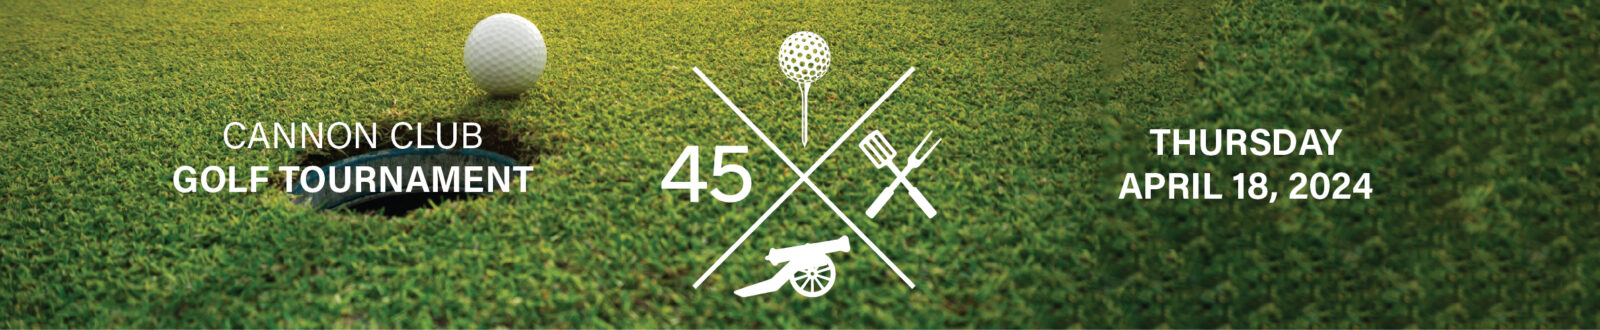 Inaugural Golf Tournament at The Cannon Club - Thursday, April 18, 2024 9:00 AM to 5:00 PM